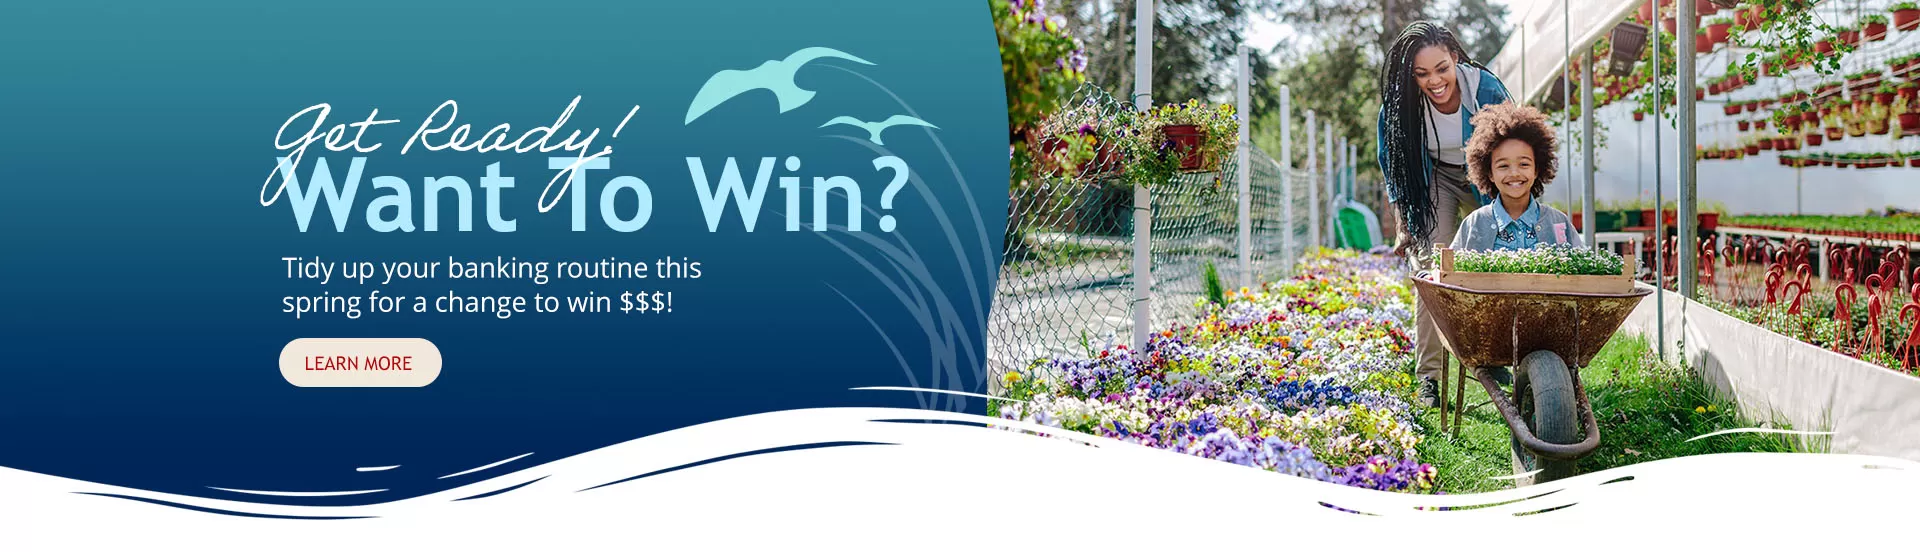 Use Beach Municipal digital services for a change to win $1000